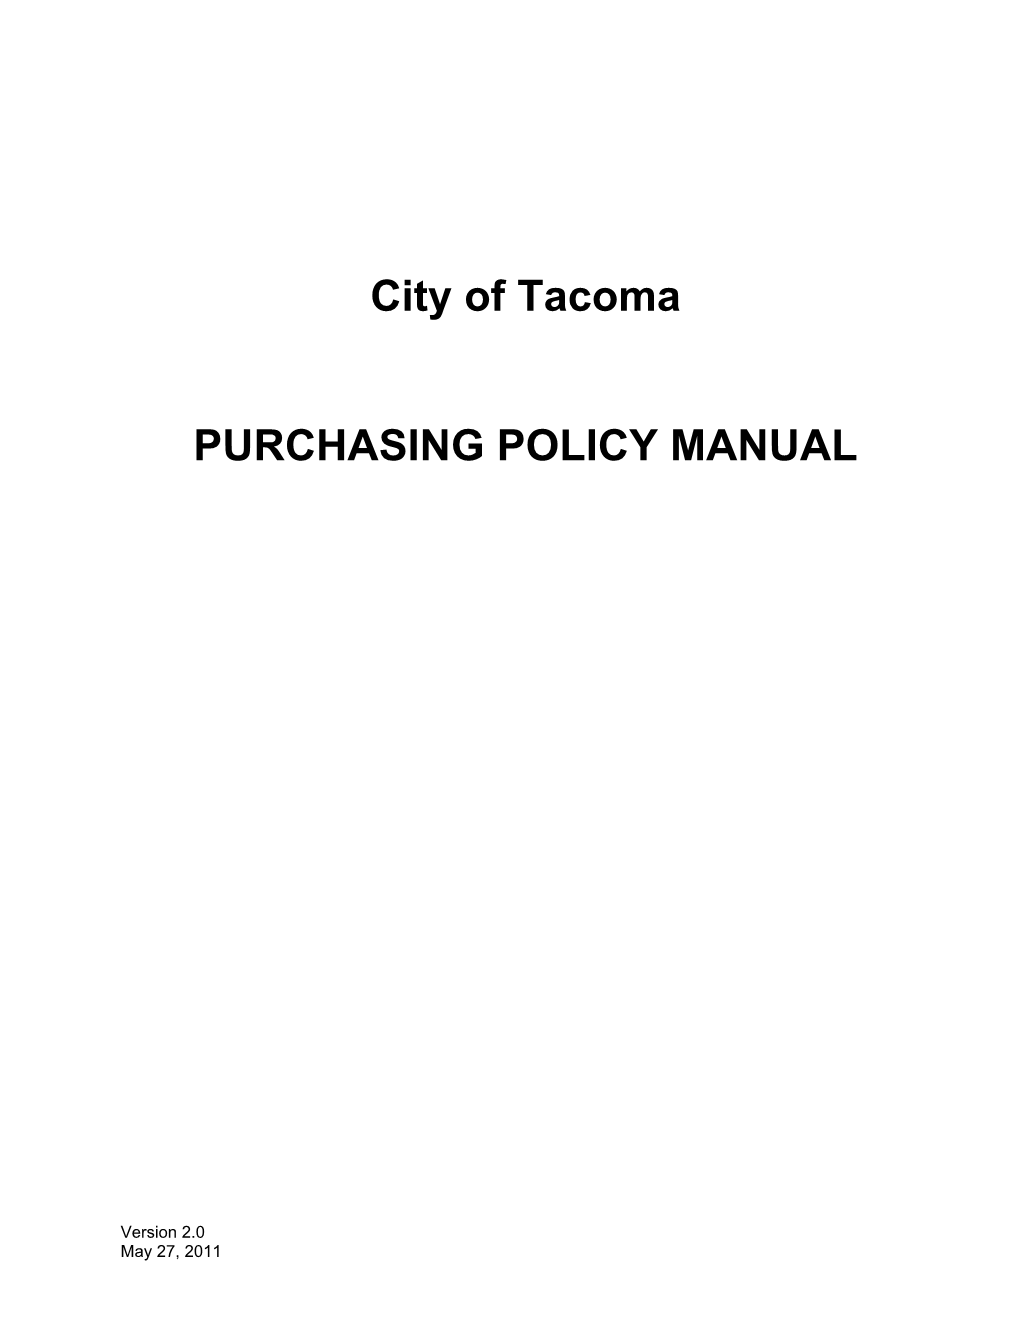 City of Tacoma Purchasing Policy Manual, the Following Instructions Are Applicable for Both Sealed and Informal Submittals: A